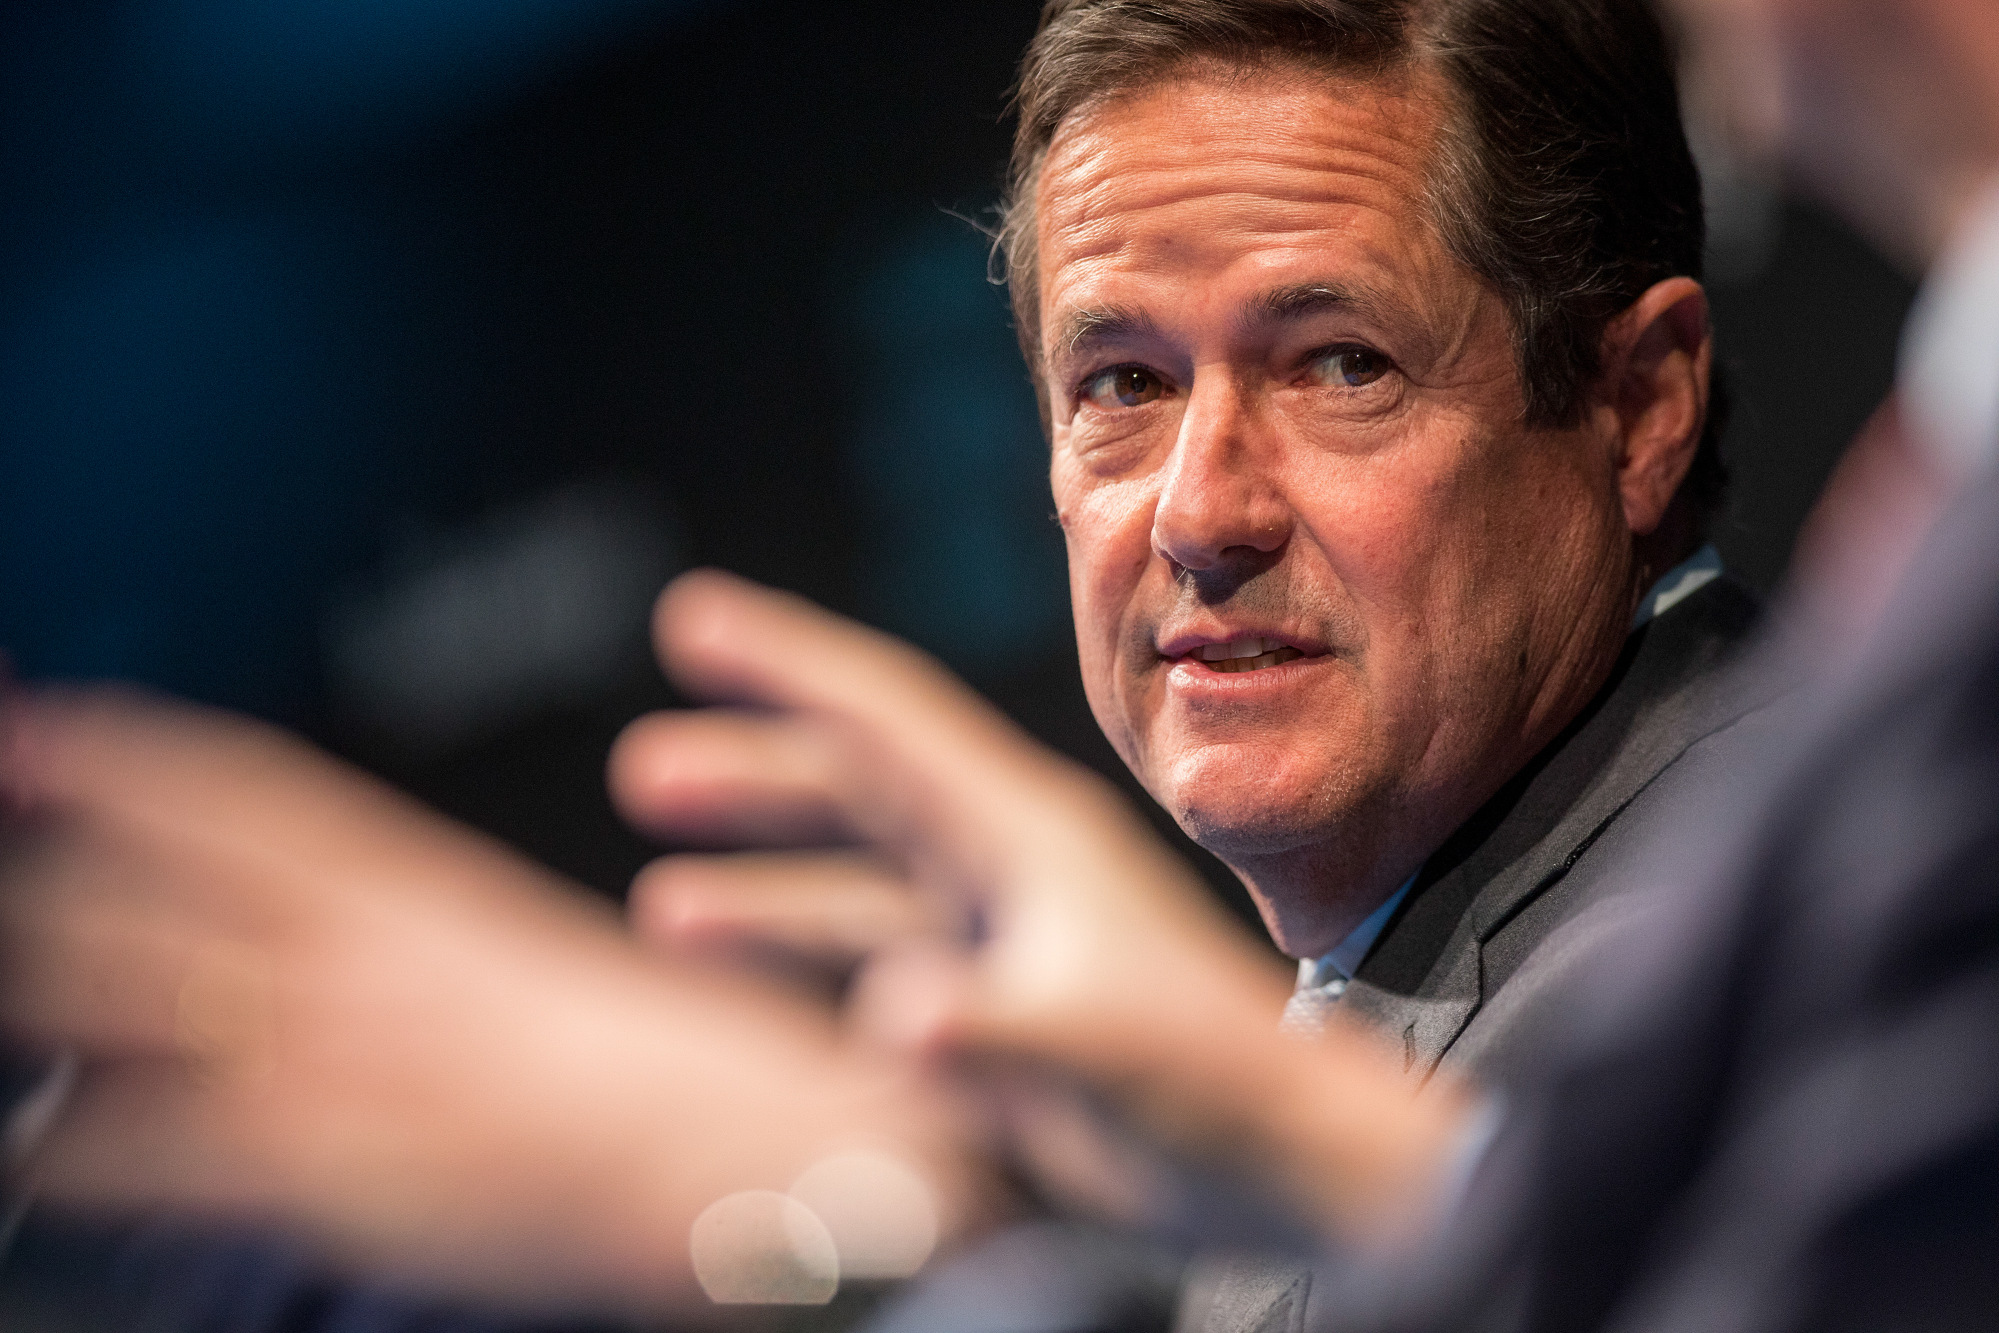 Barclays CEO Jes Staley Gets a Brexit Lifeline Bloomberg